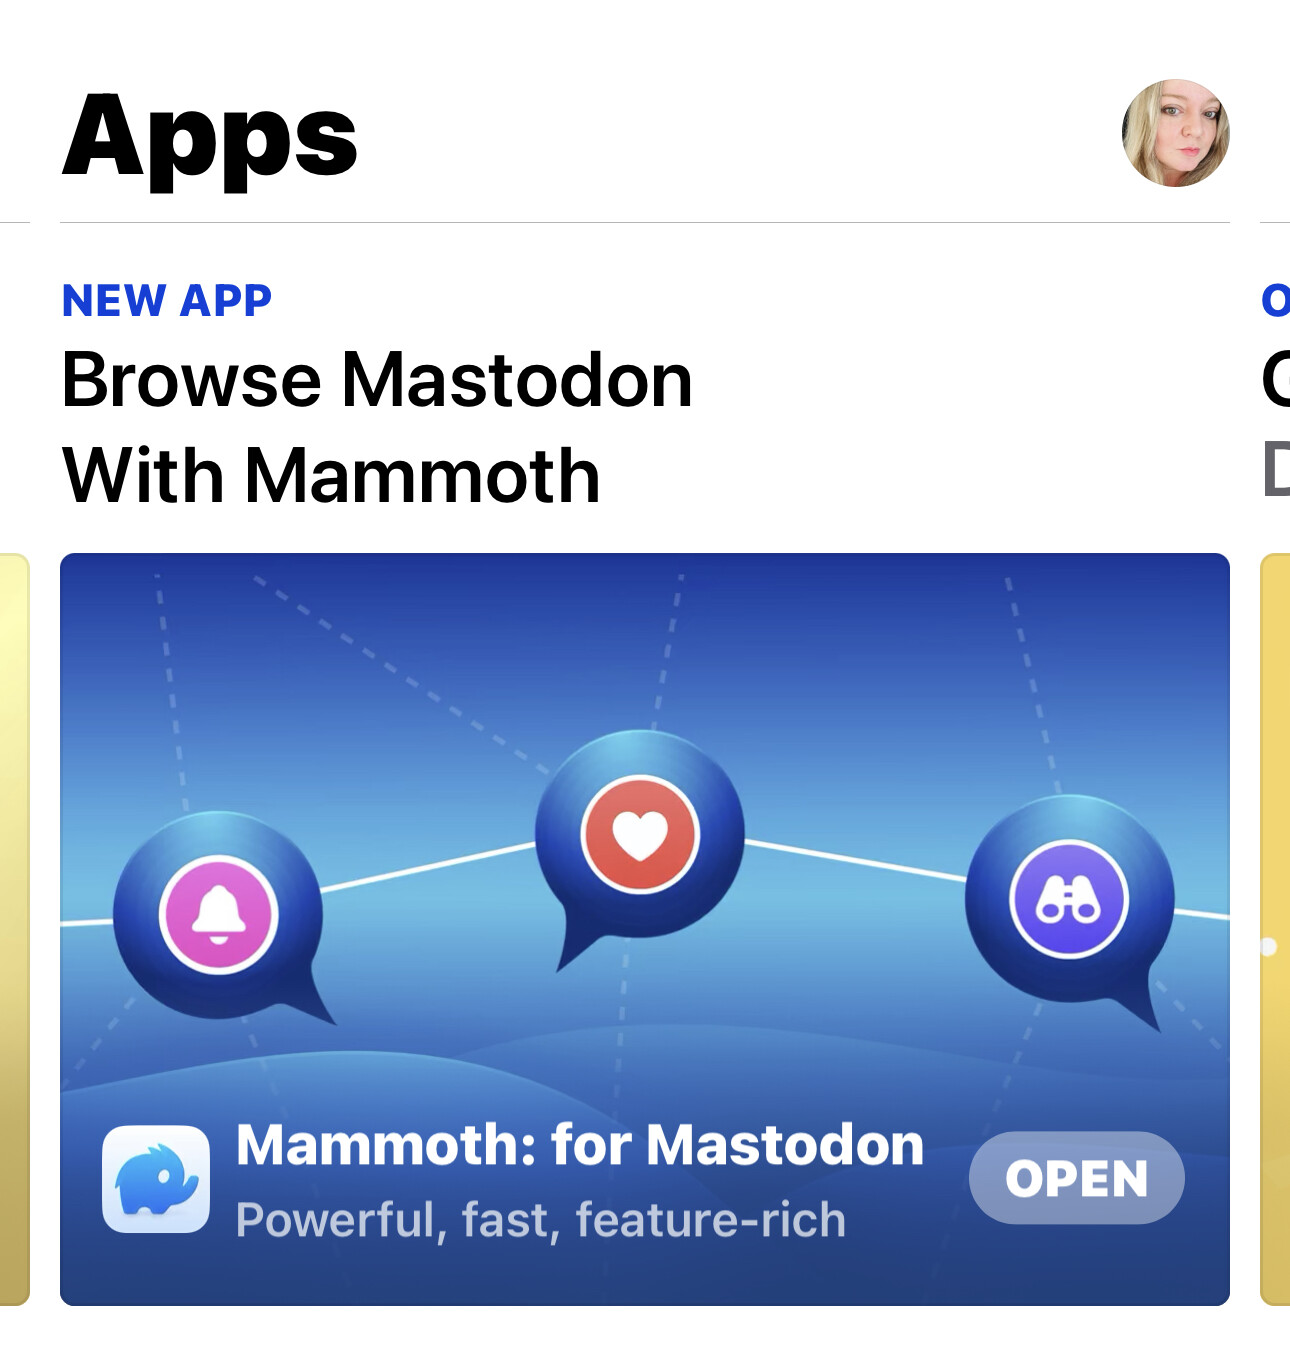 A Mastodon app is featured on the App Store 